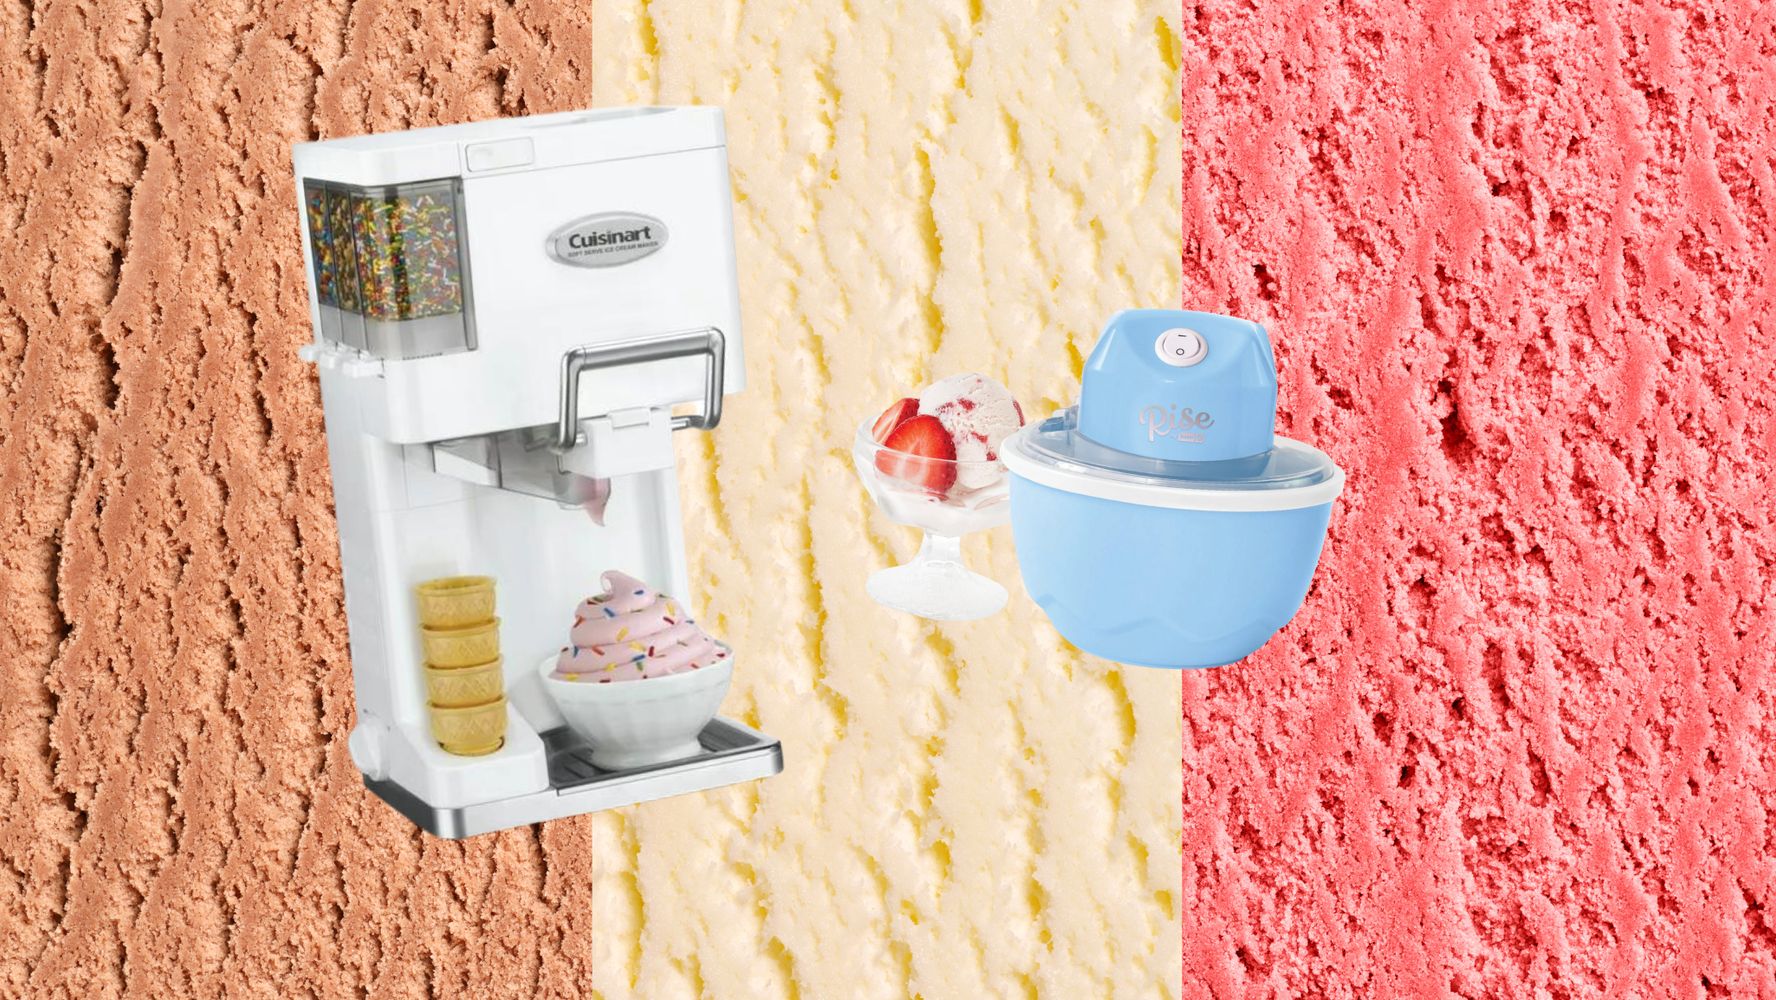 This $80 Cuisinart Ice Cream Maker Is the Best for Families